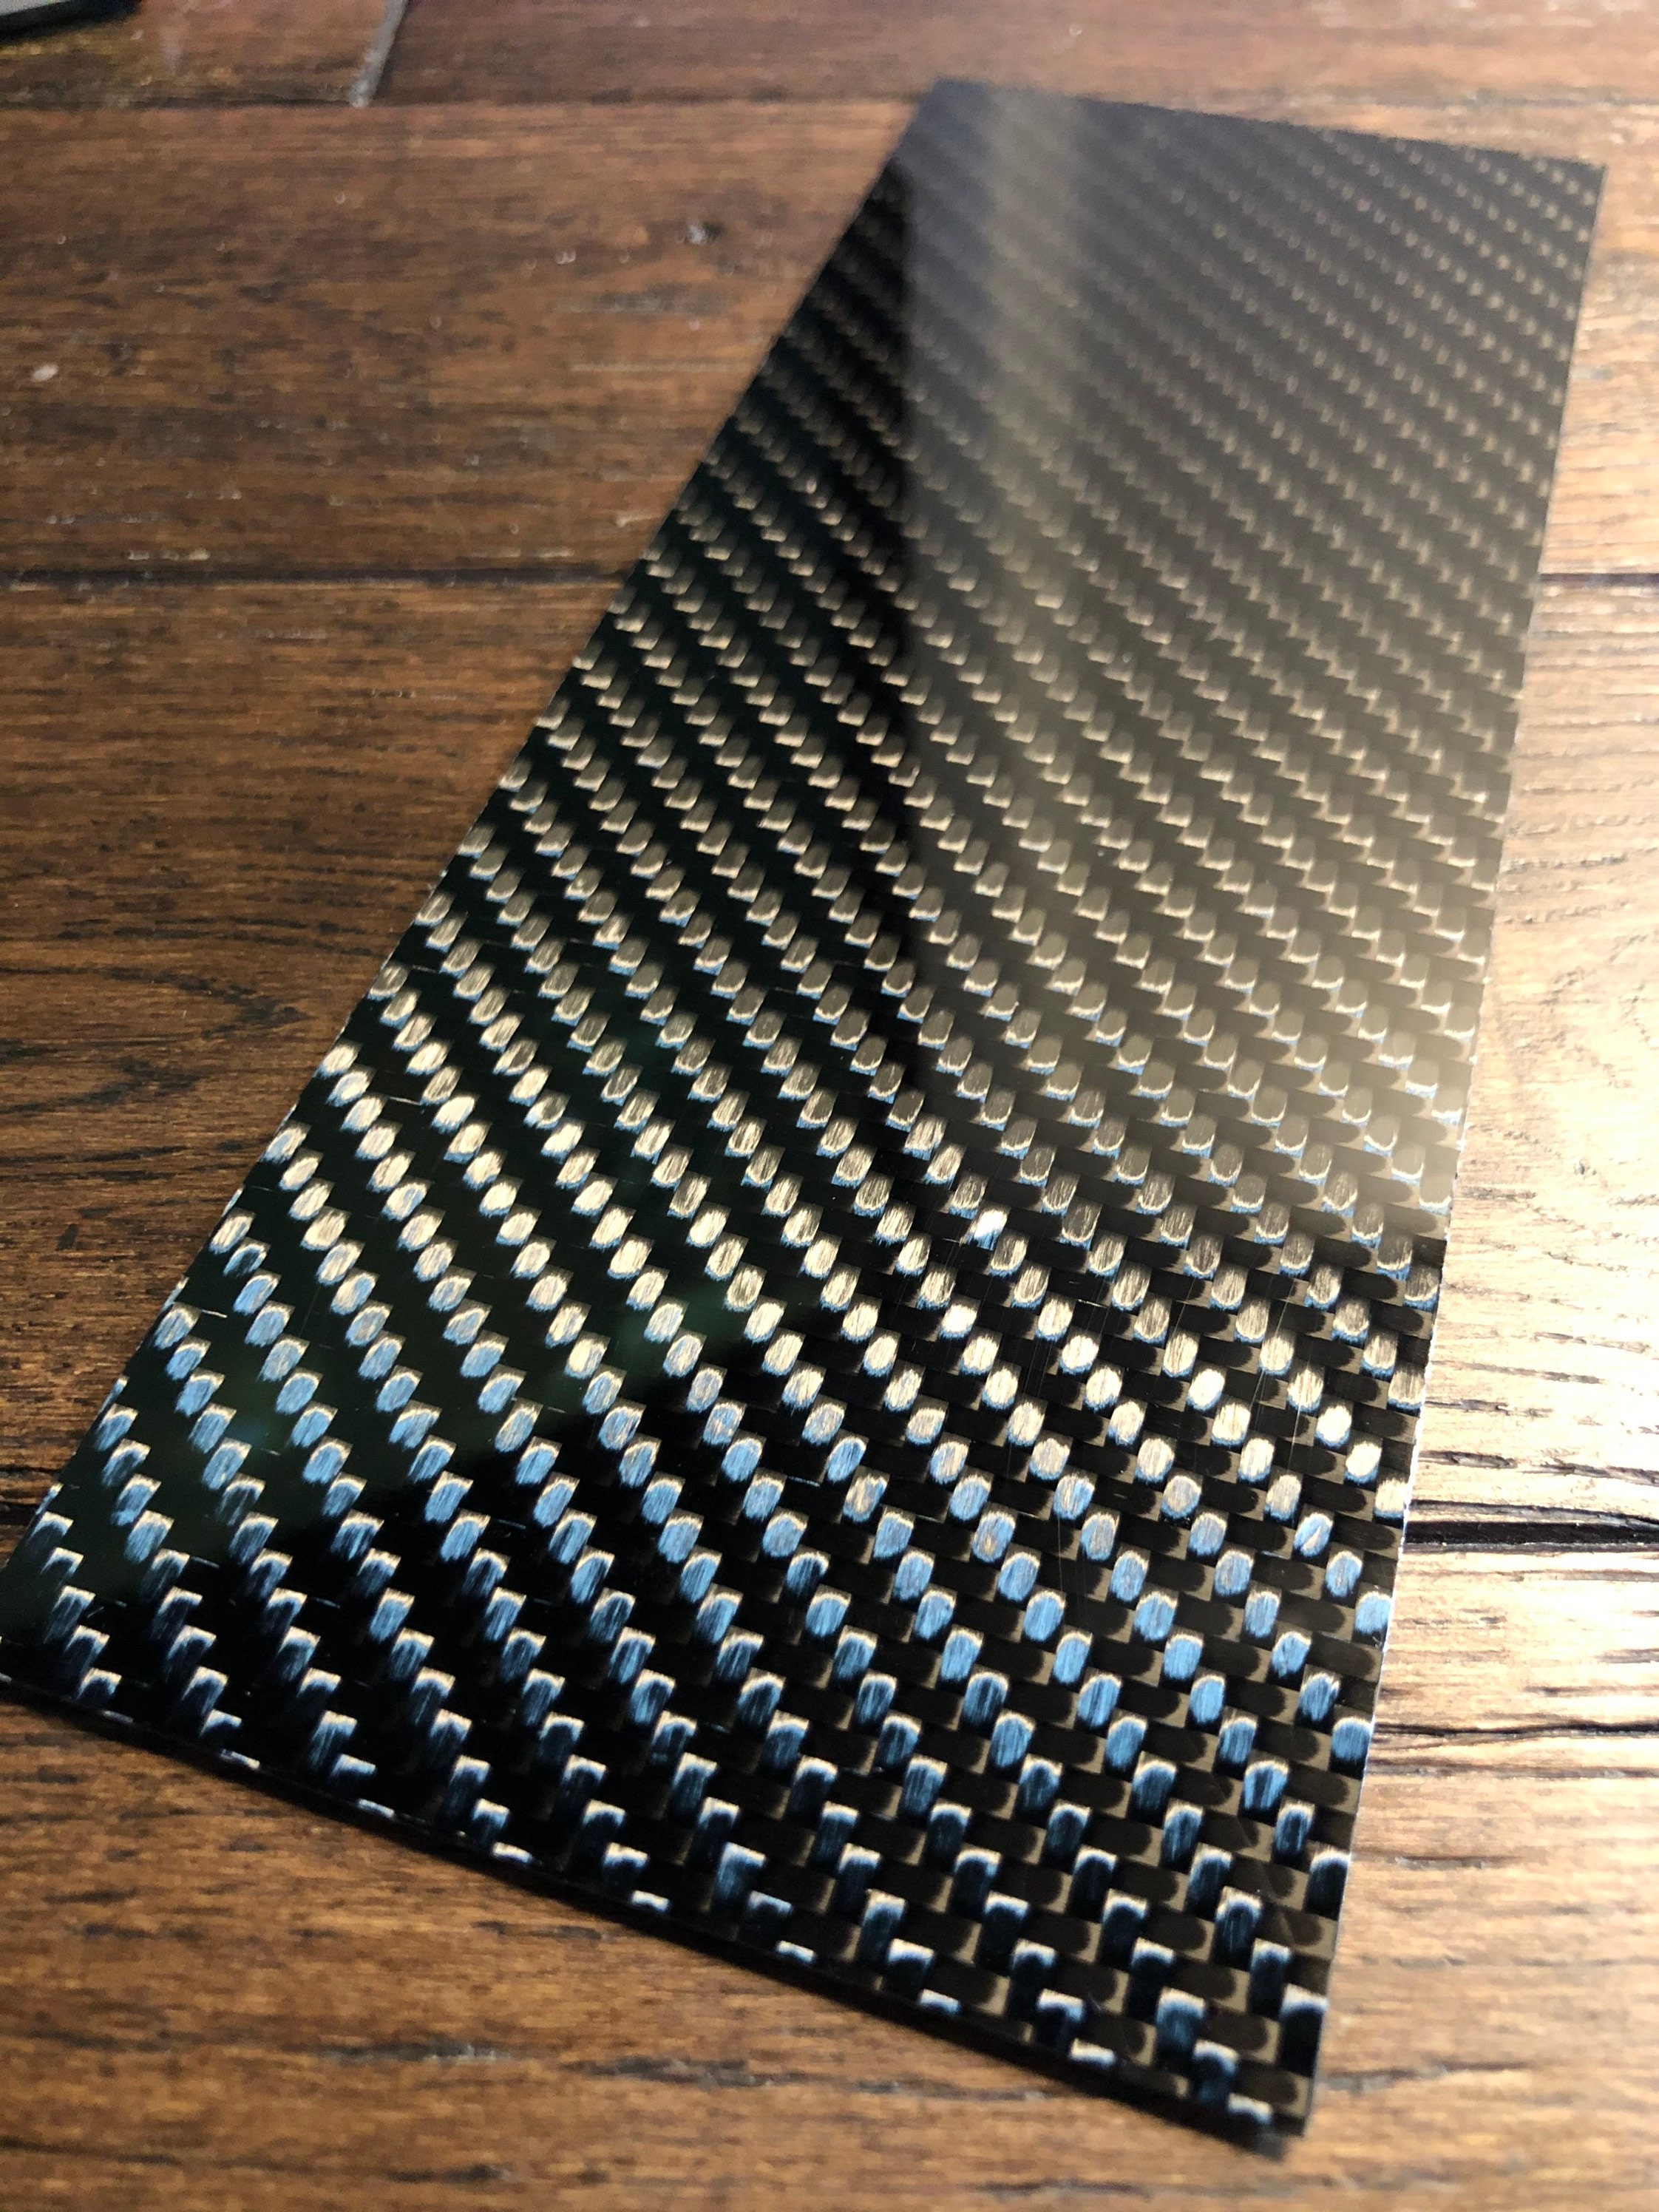 Carbon Fiber Sheets - High Gloss (Aesthetic/Cosmetic)